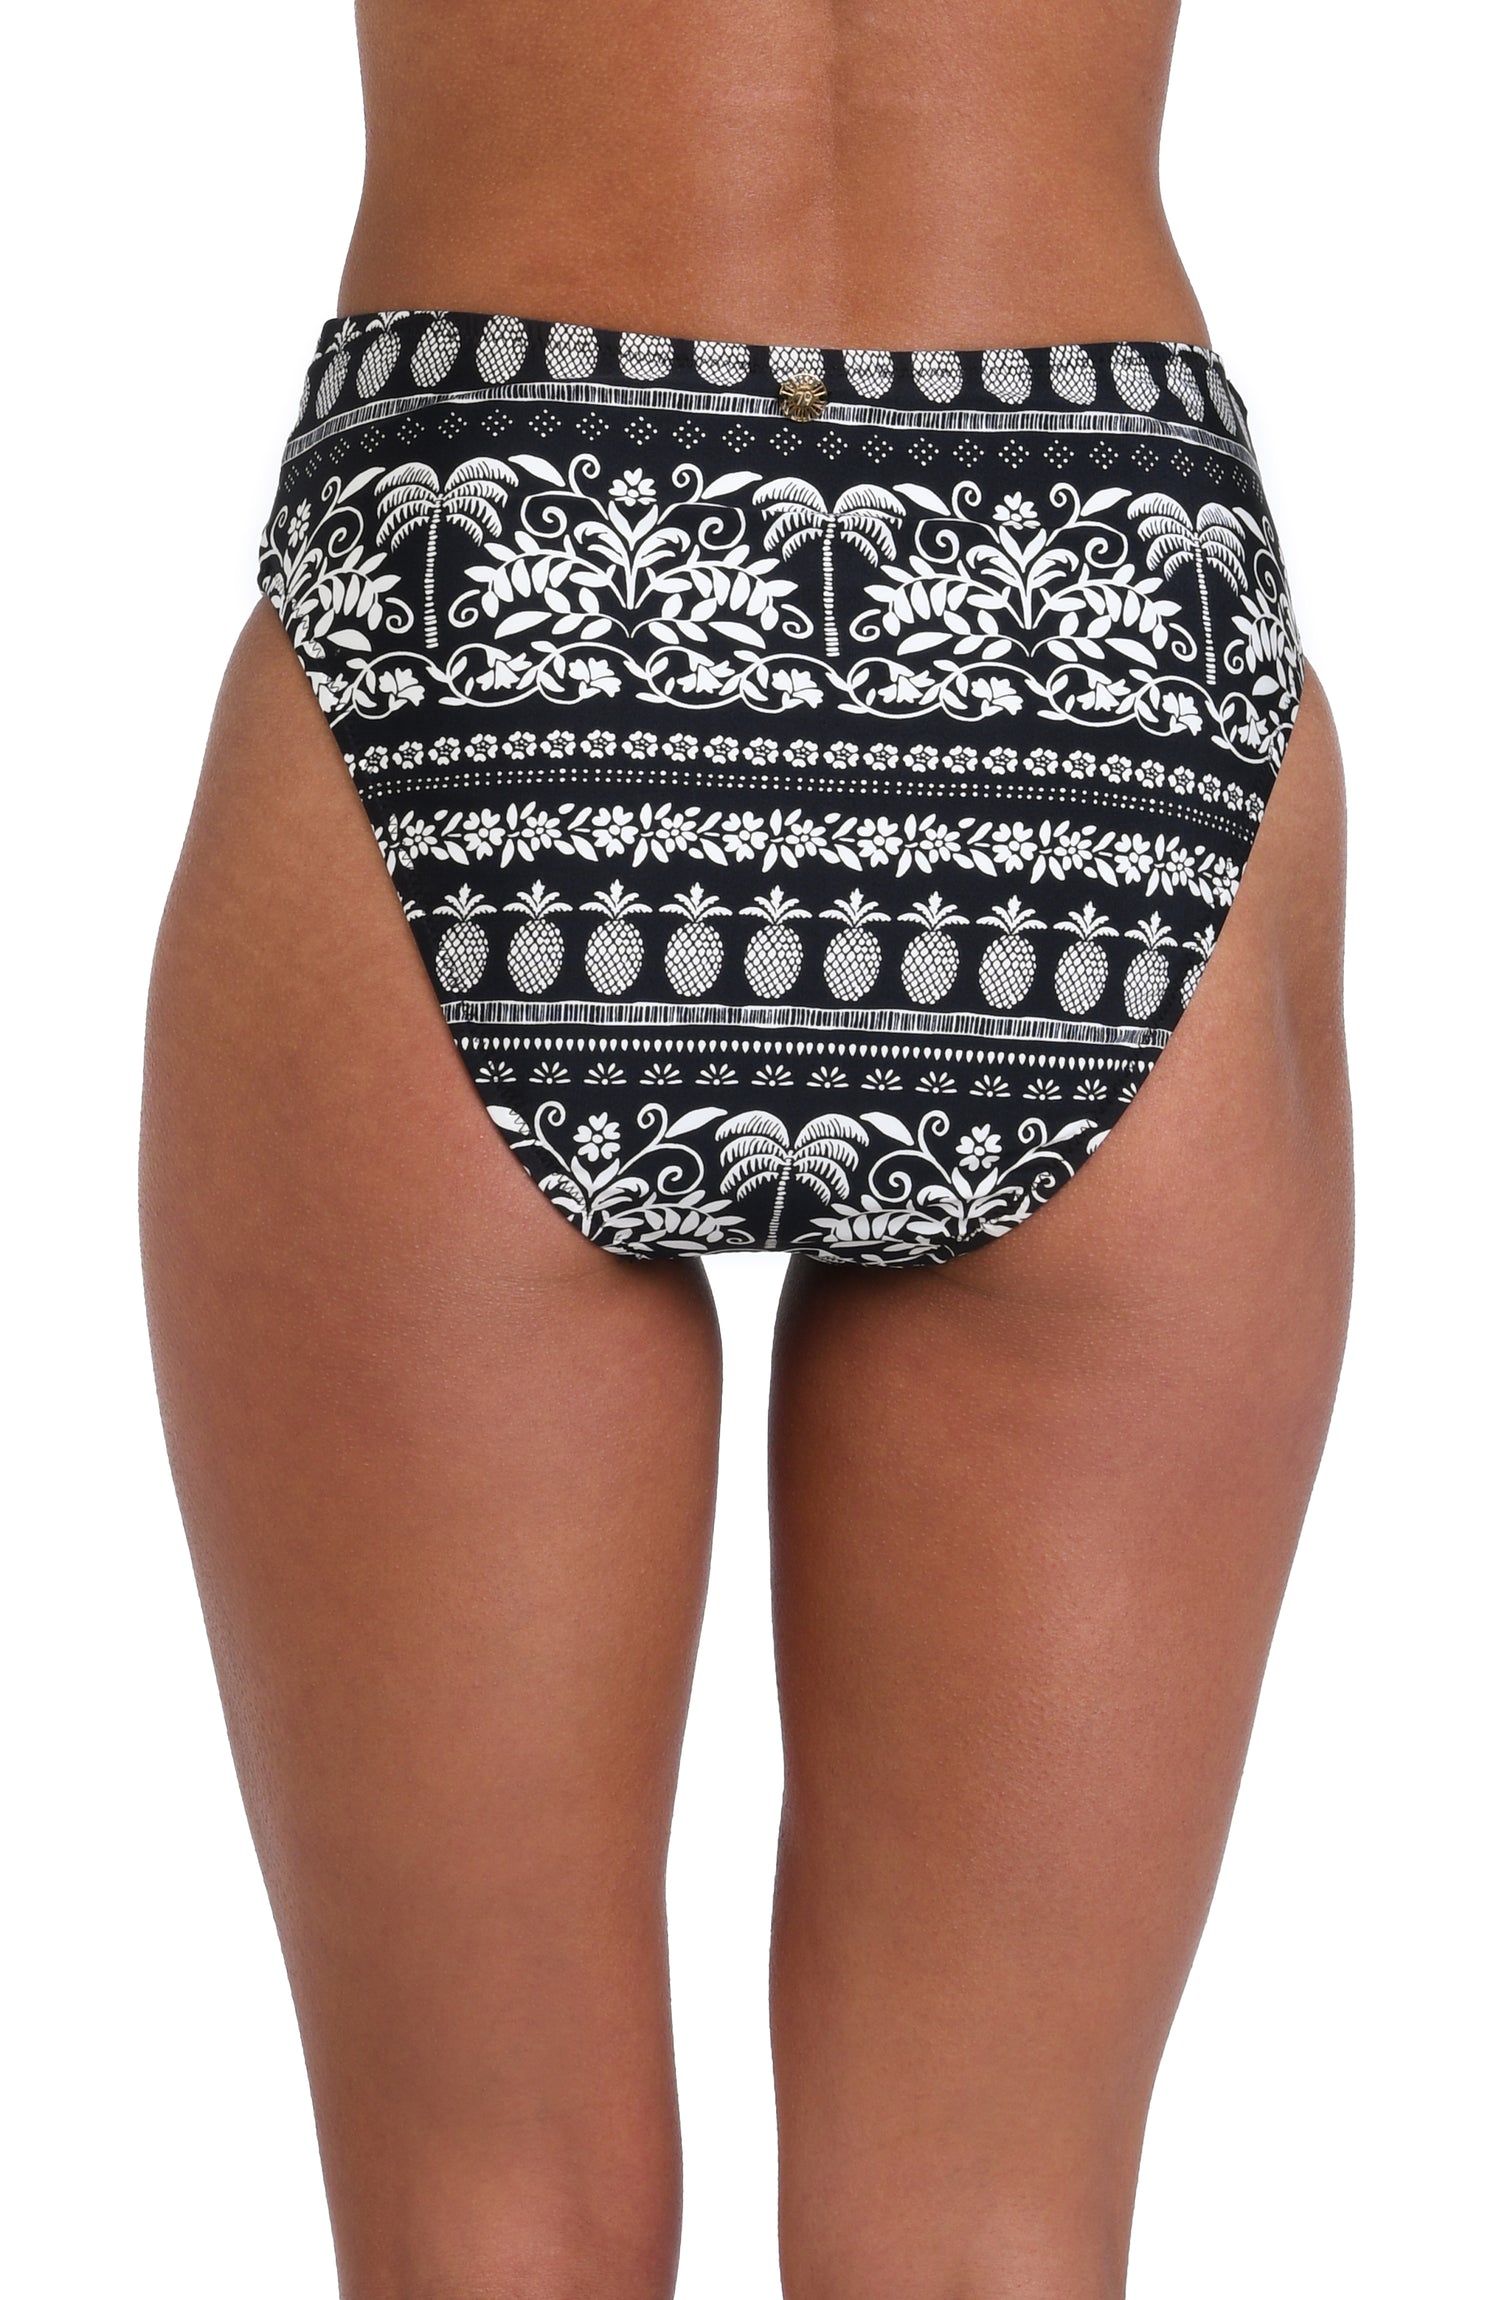 Model is wearing a black and white monochromatic patterned belted high waist swimsuit bottom that features an allover tropical motif with hints of palm trees and pineapples set against a black background.